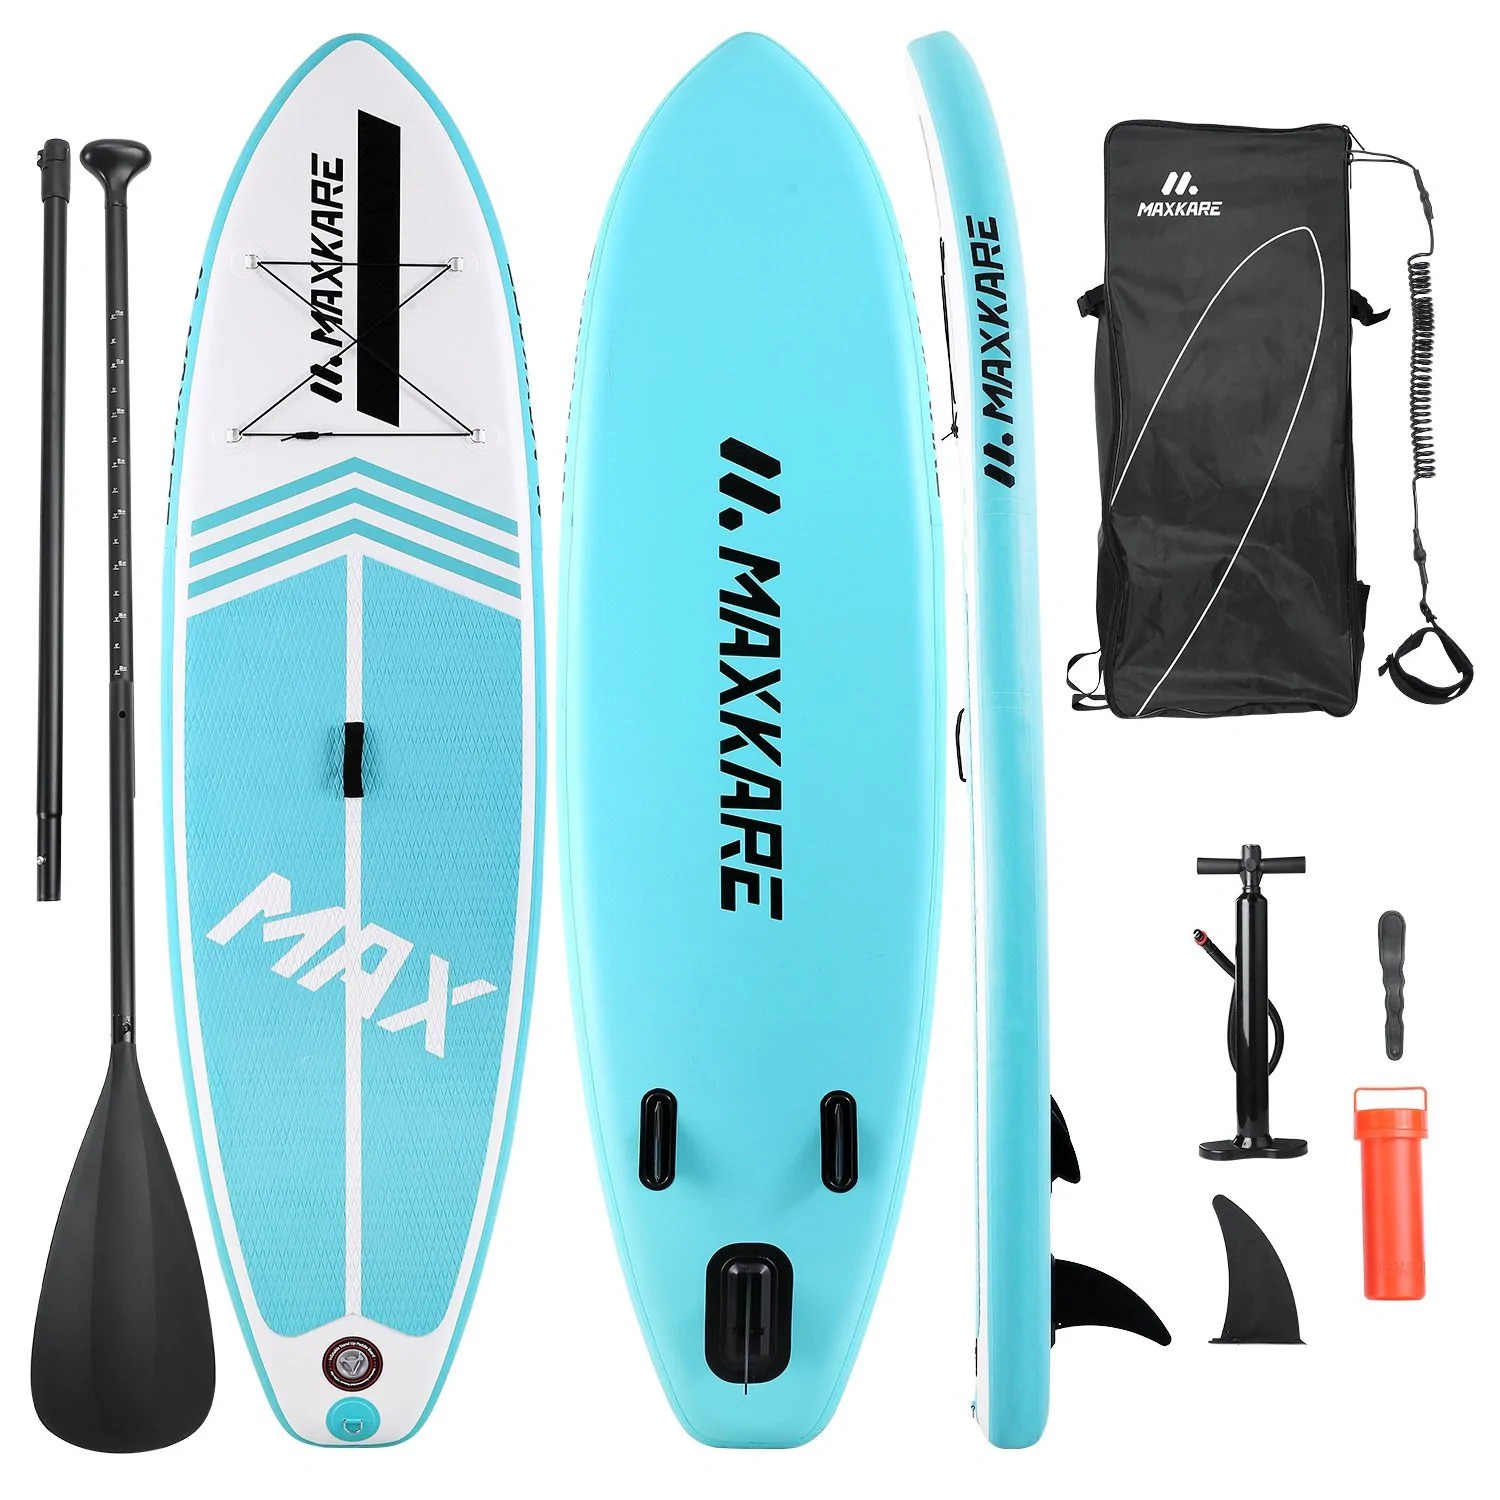  AKASO Inflatable Stand-Up Paddleboard, Yoga SUP with